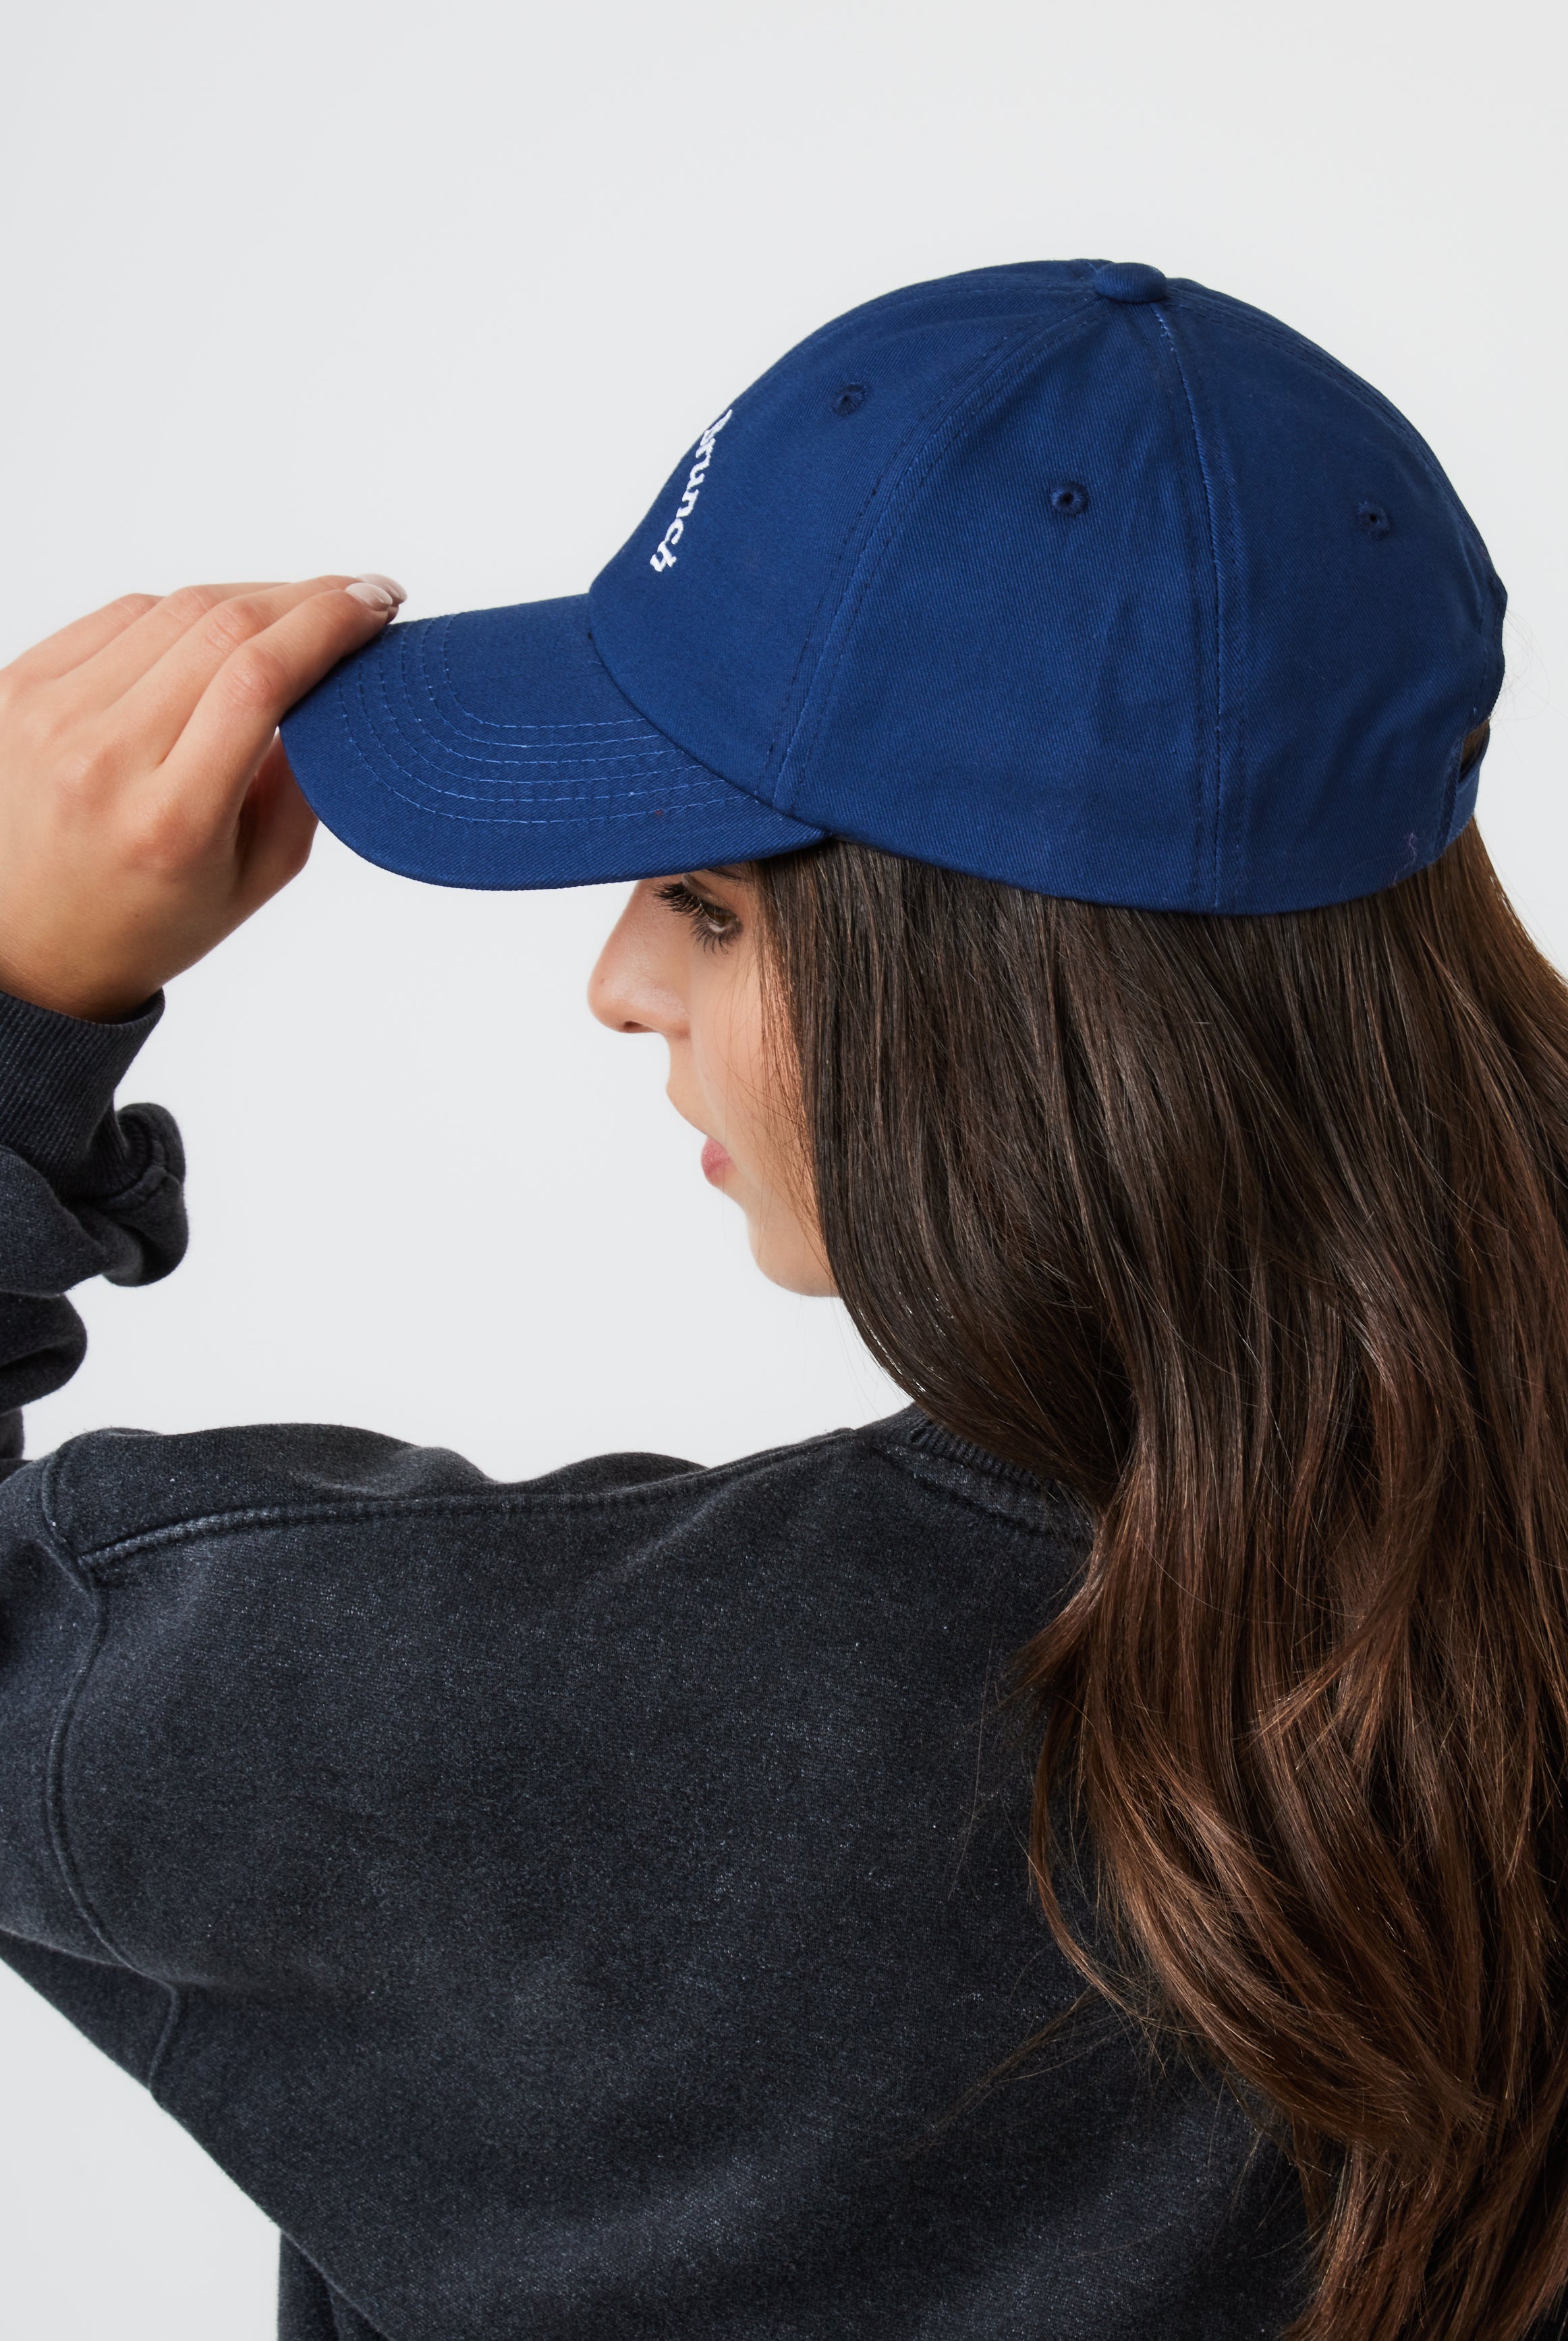 Sunday Brunch Baseball Cap in Navy | Hat | Cap | Minimal | Preppy | Sport | Sporty | Sports | Casual | Accessories | Accessory | Women's Accessories | Embroidered | Athleisure | Present | Blue | Corpcore | 